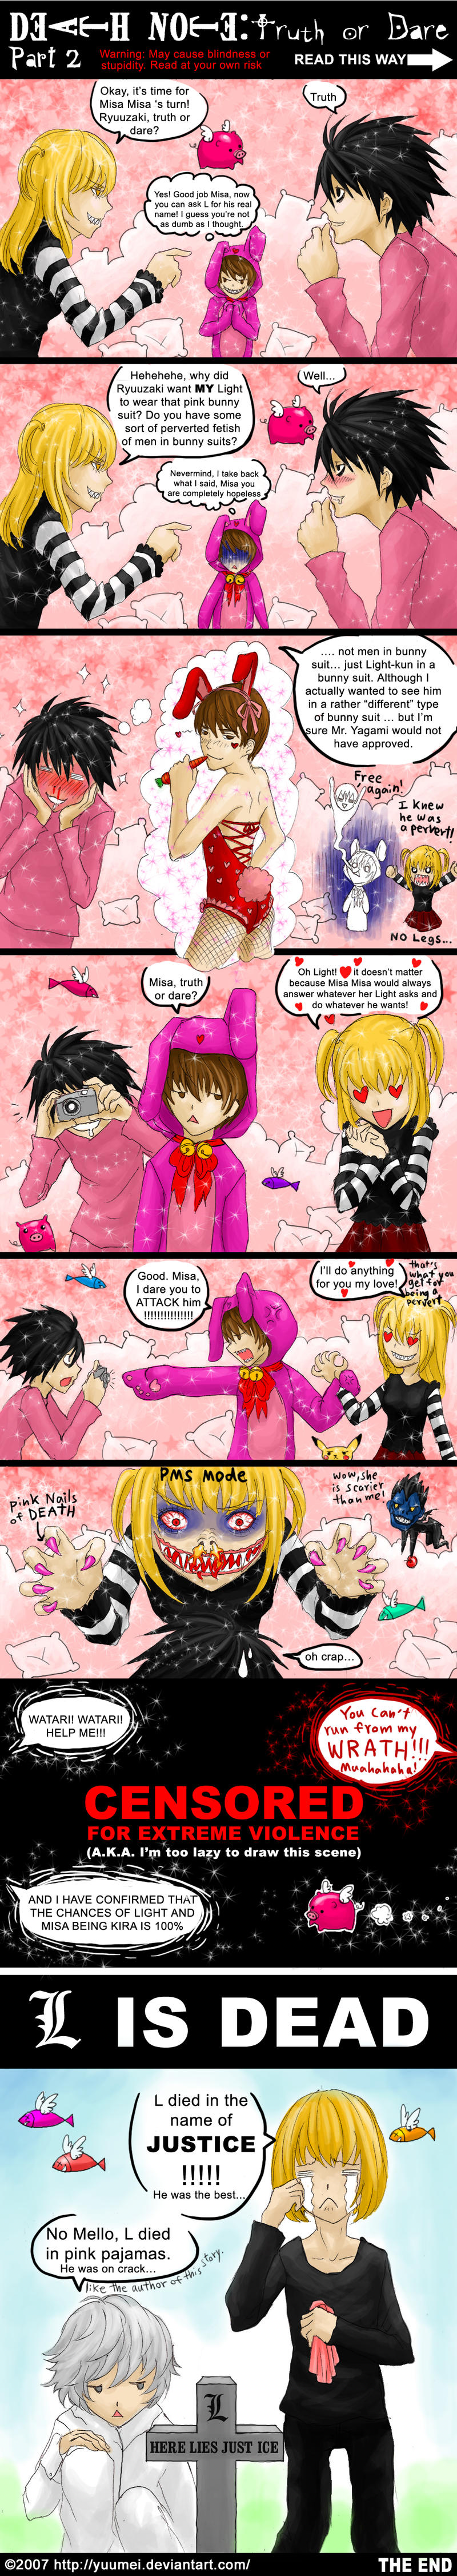 Death Note Truth or Dare Part2